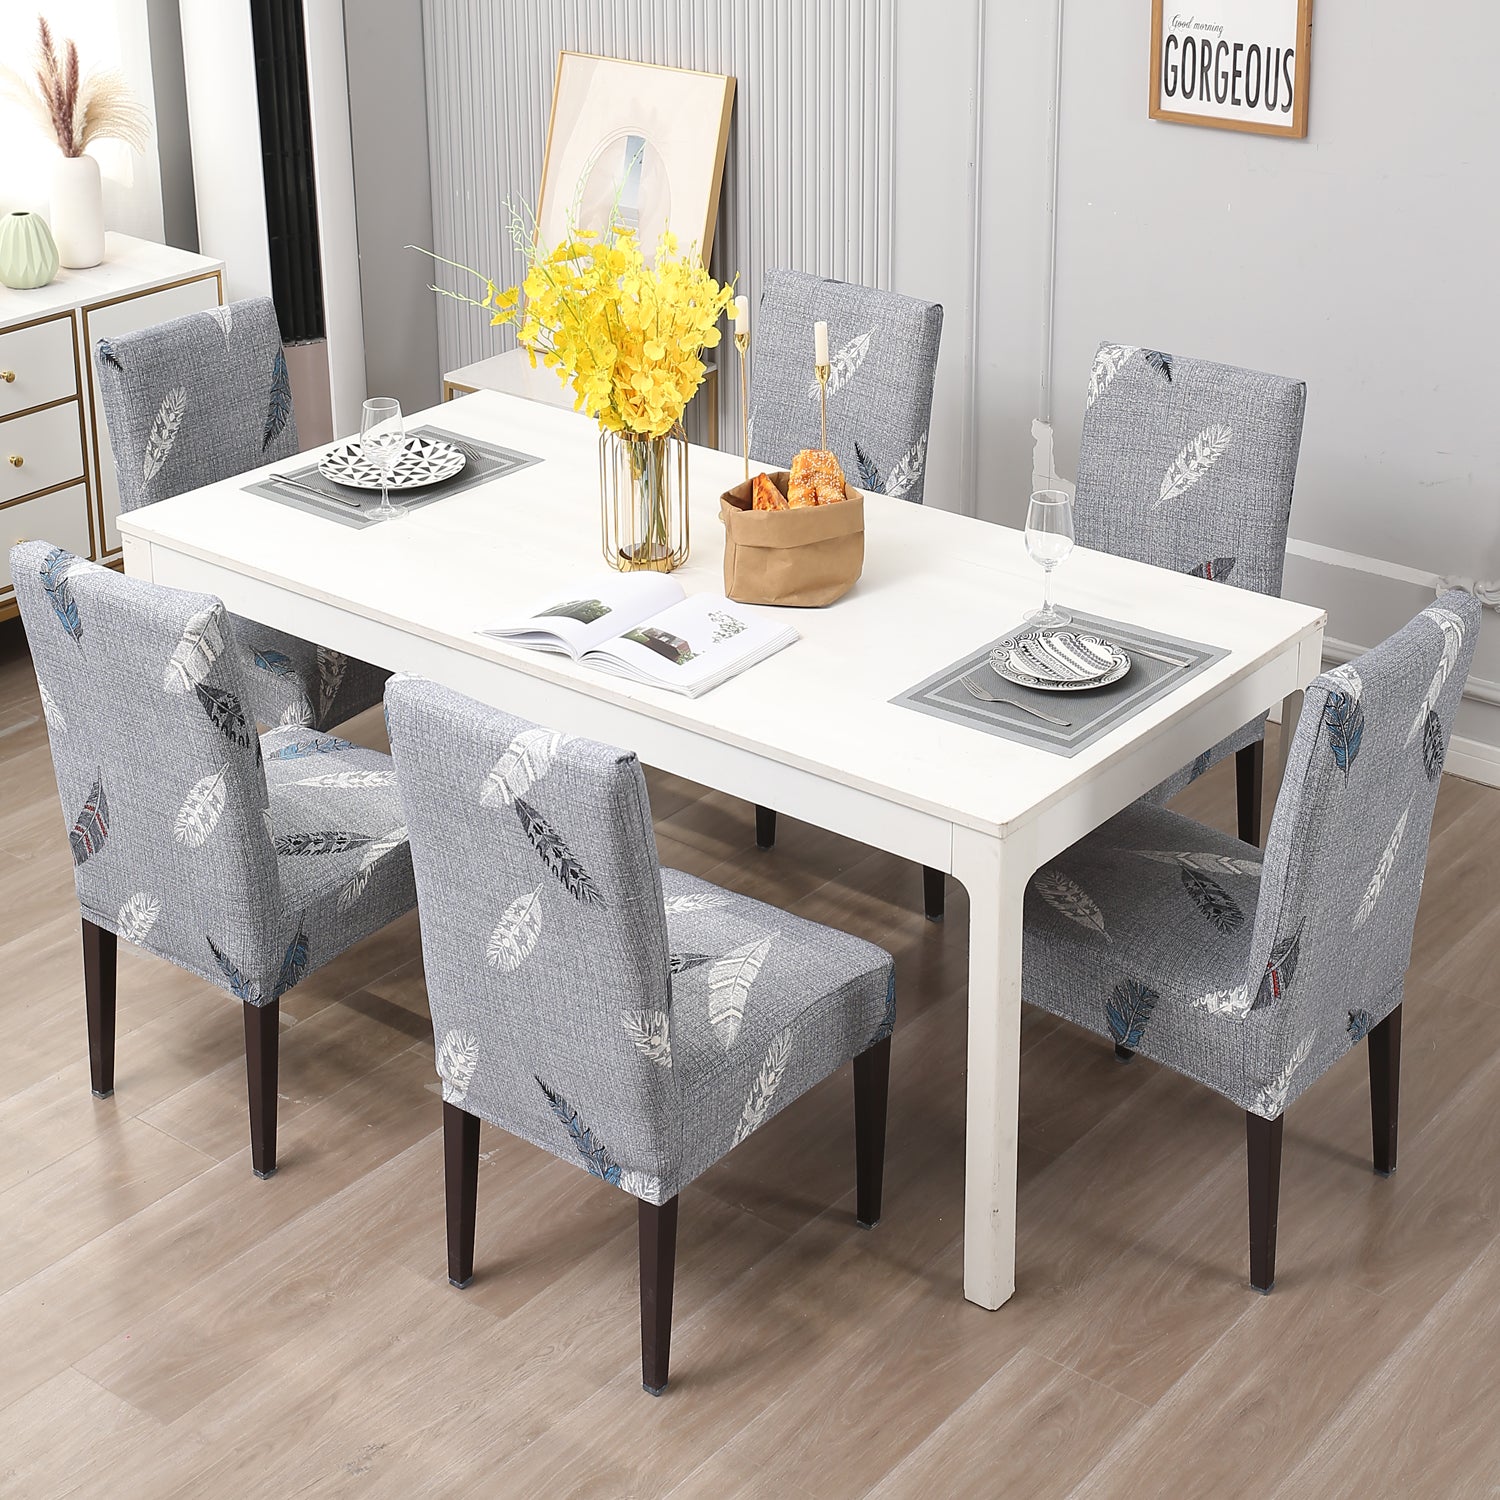 Elastic Stretchable Dining Chair Cover, Grey Feather